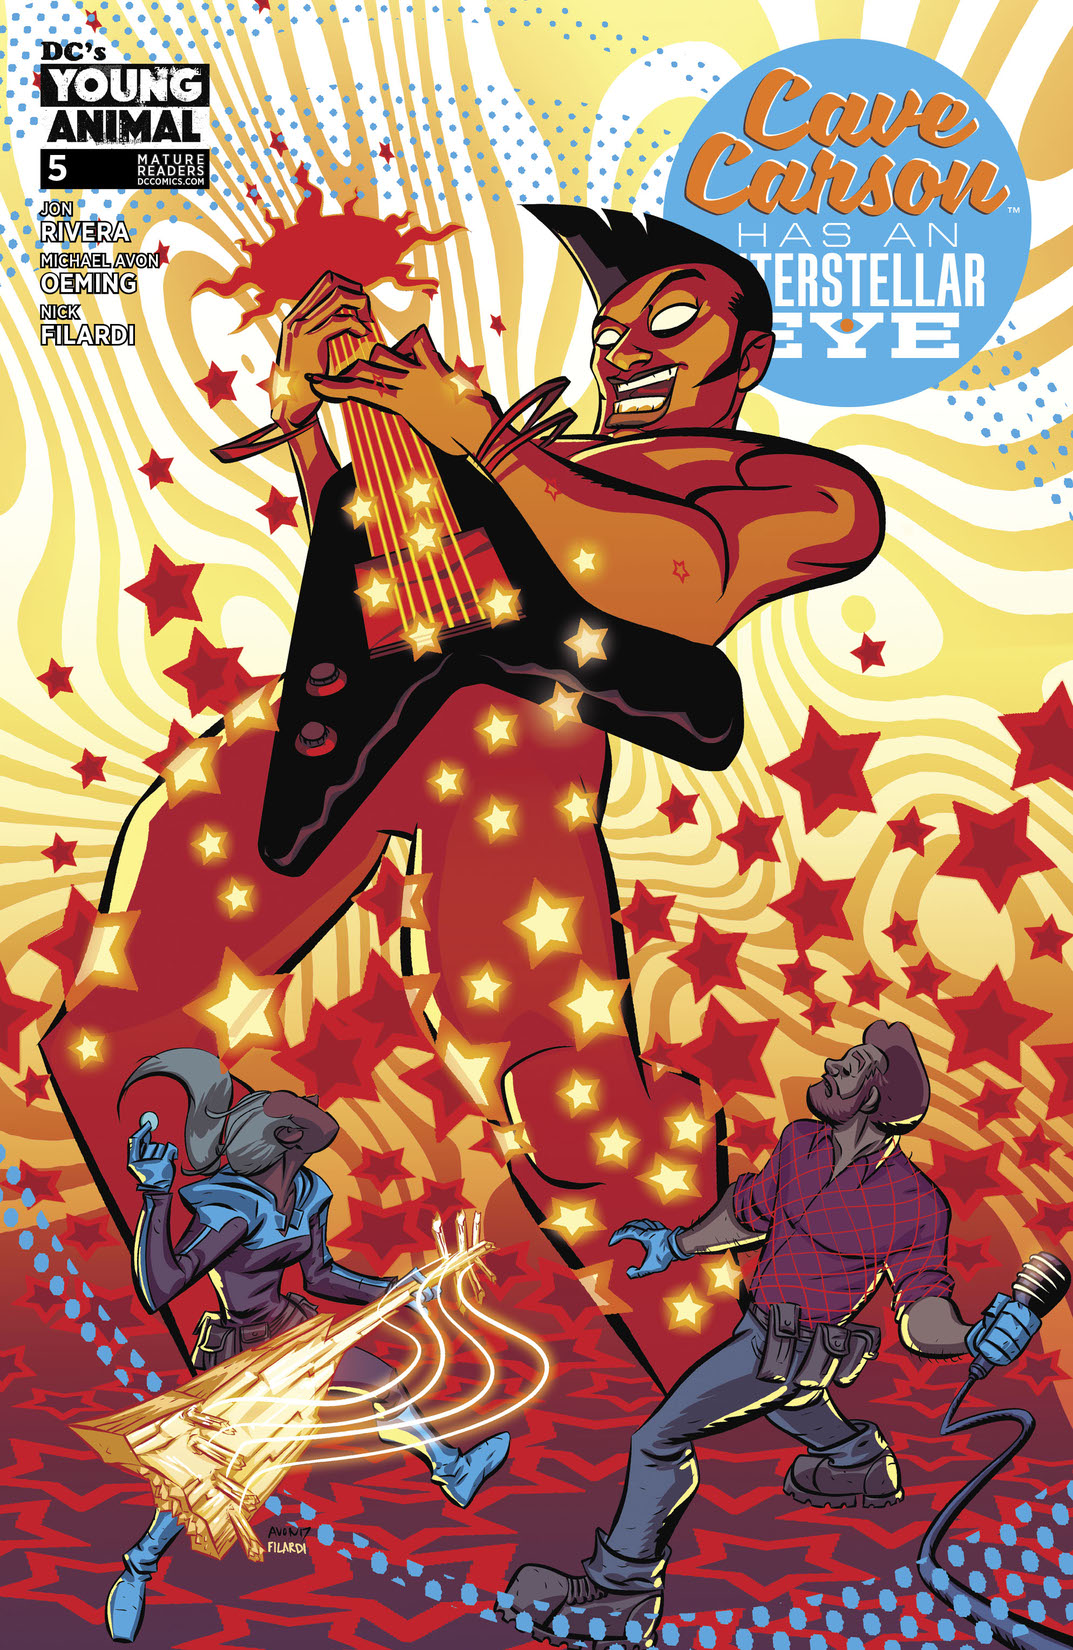 Cave Carson Has an Interstellar Eye #5 preview images